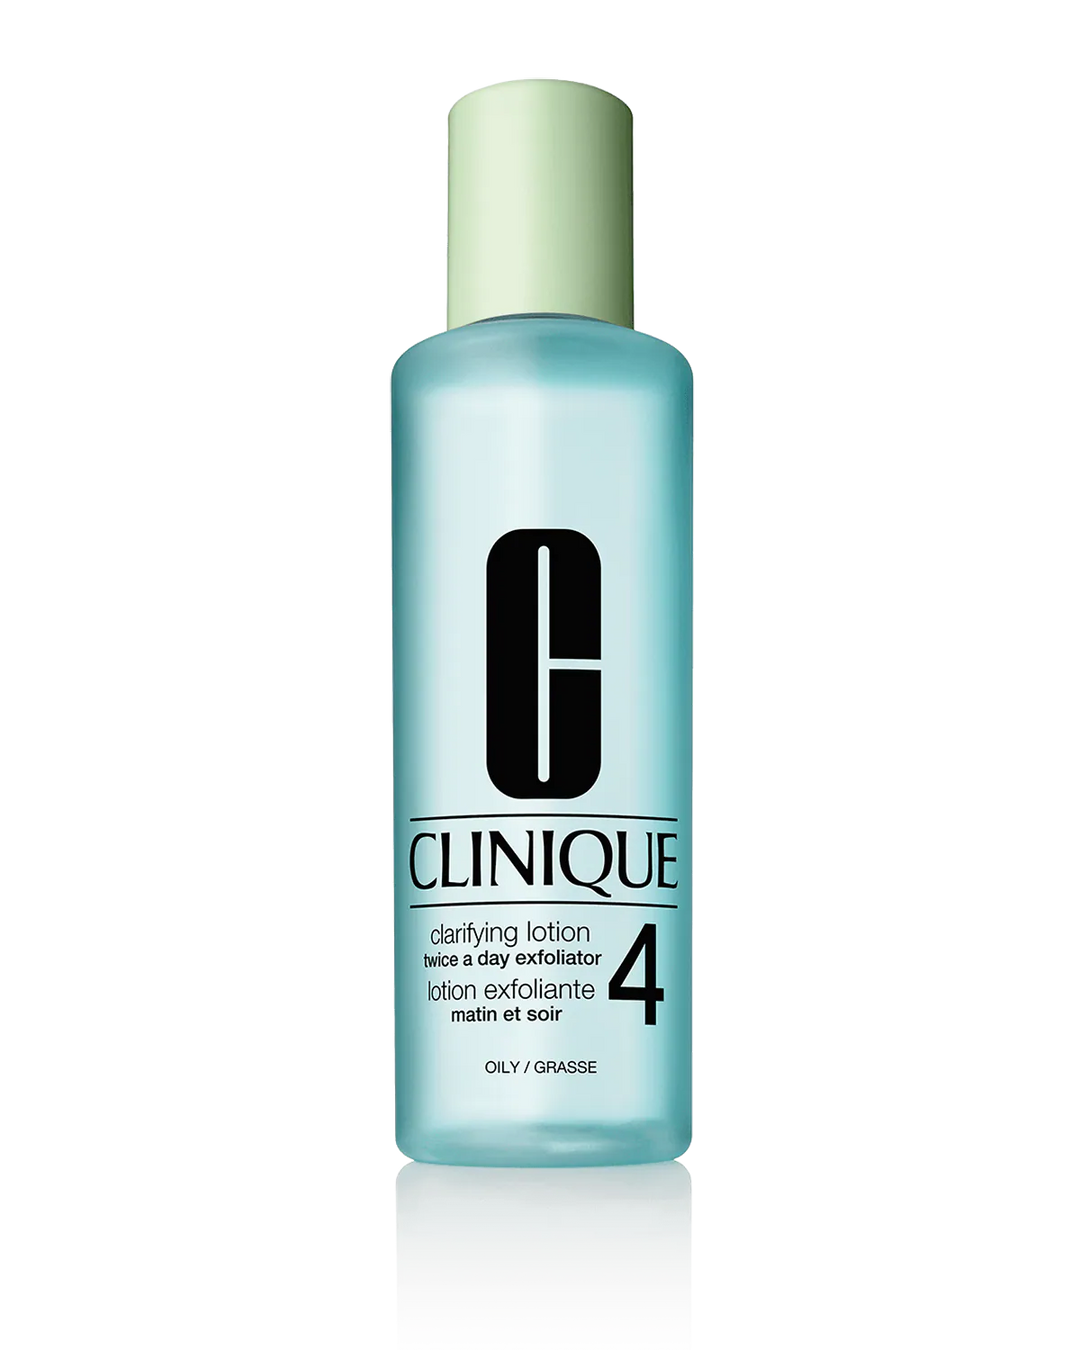 Shop The Latest Collection Of Clinique Clarifying Lotion 4 In Lebanon